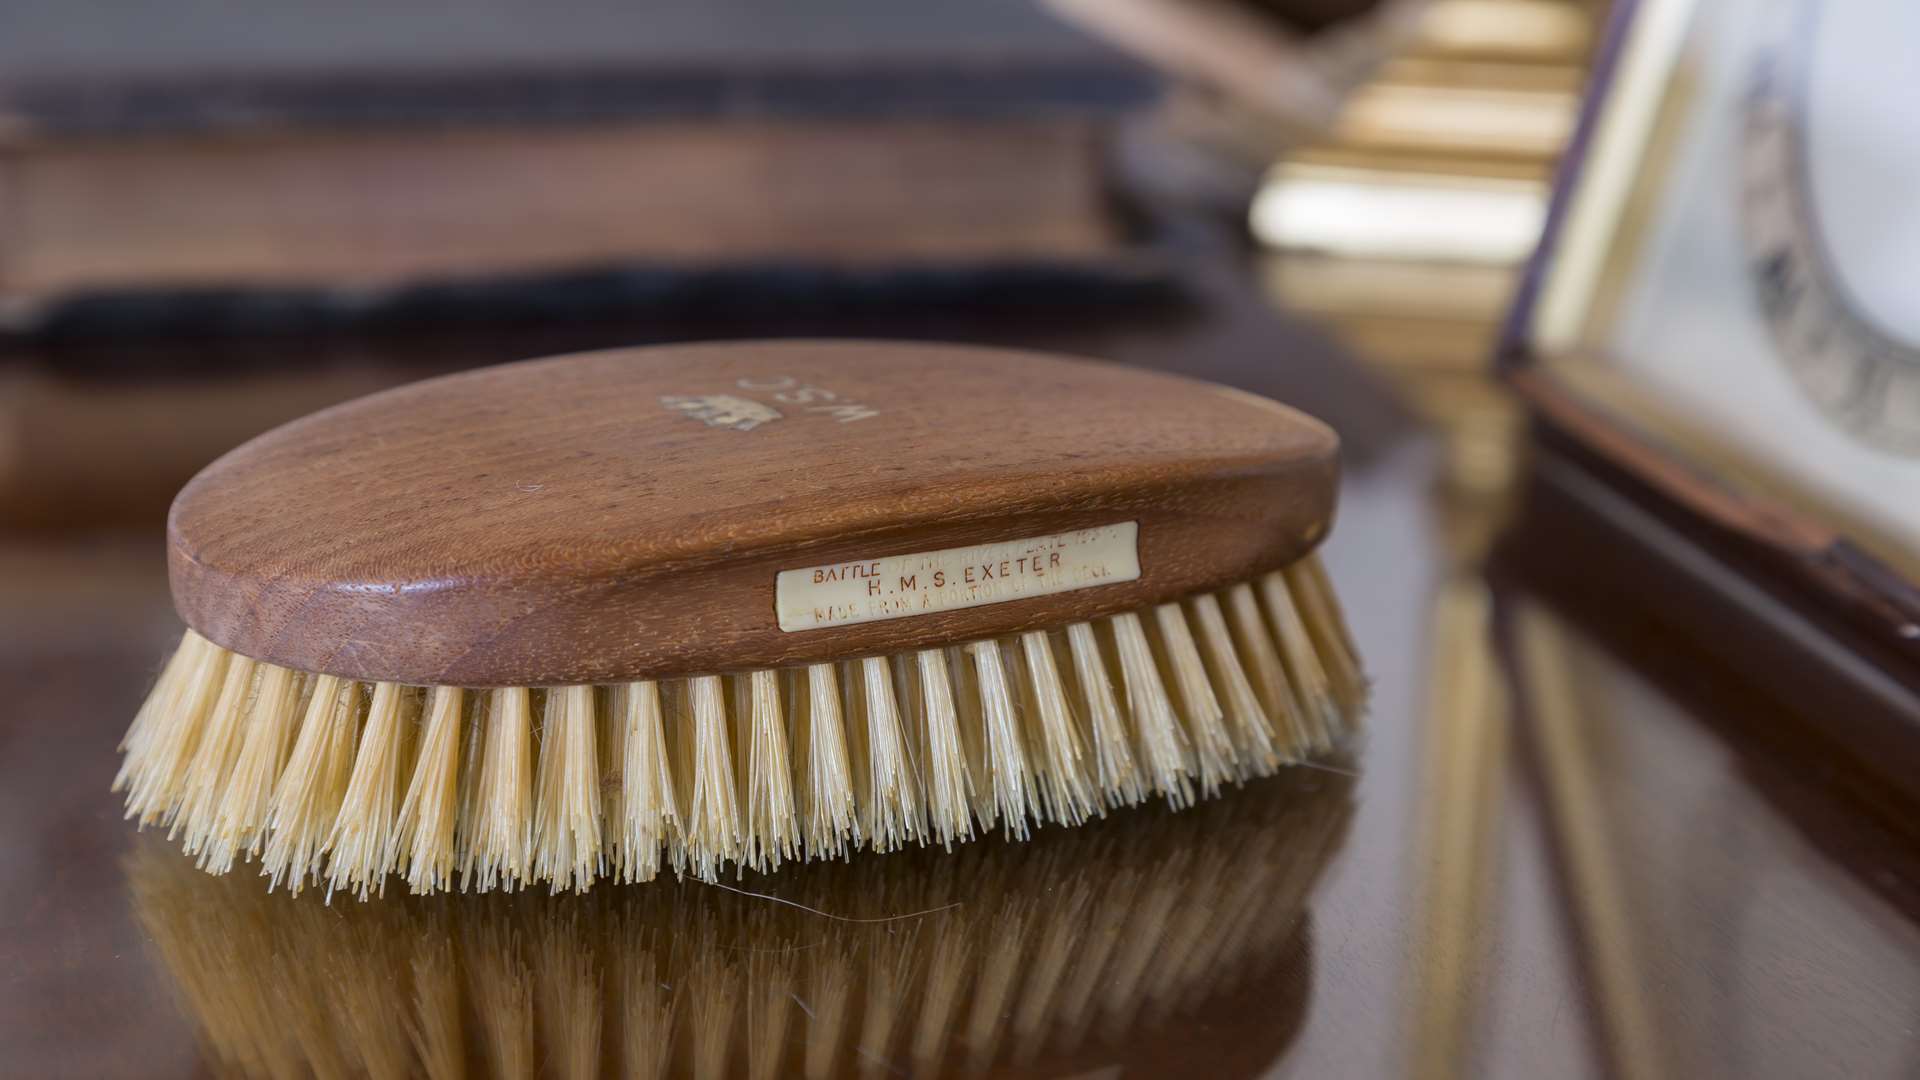 Churchill's hairbrush, made from the wood of HMS Exeter